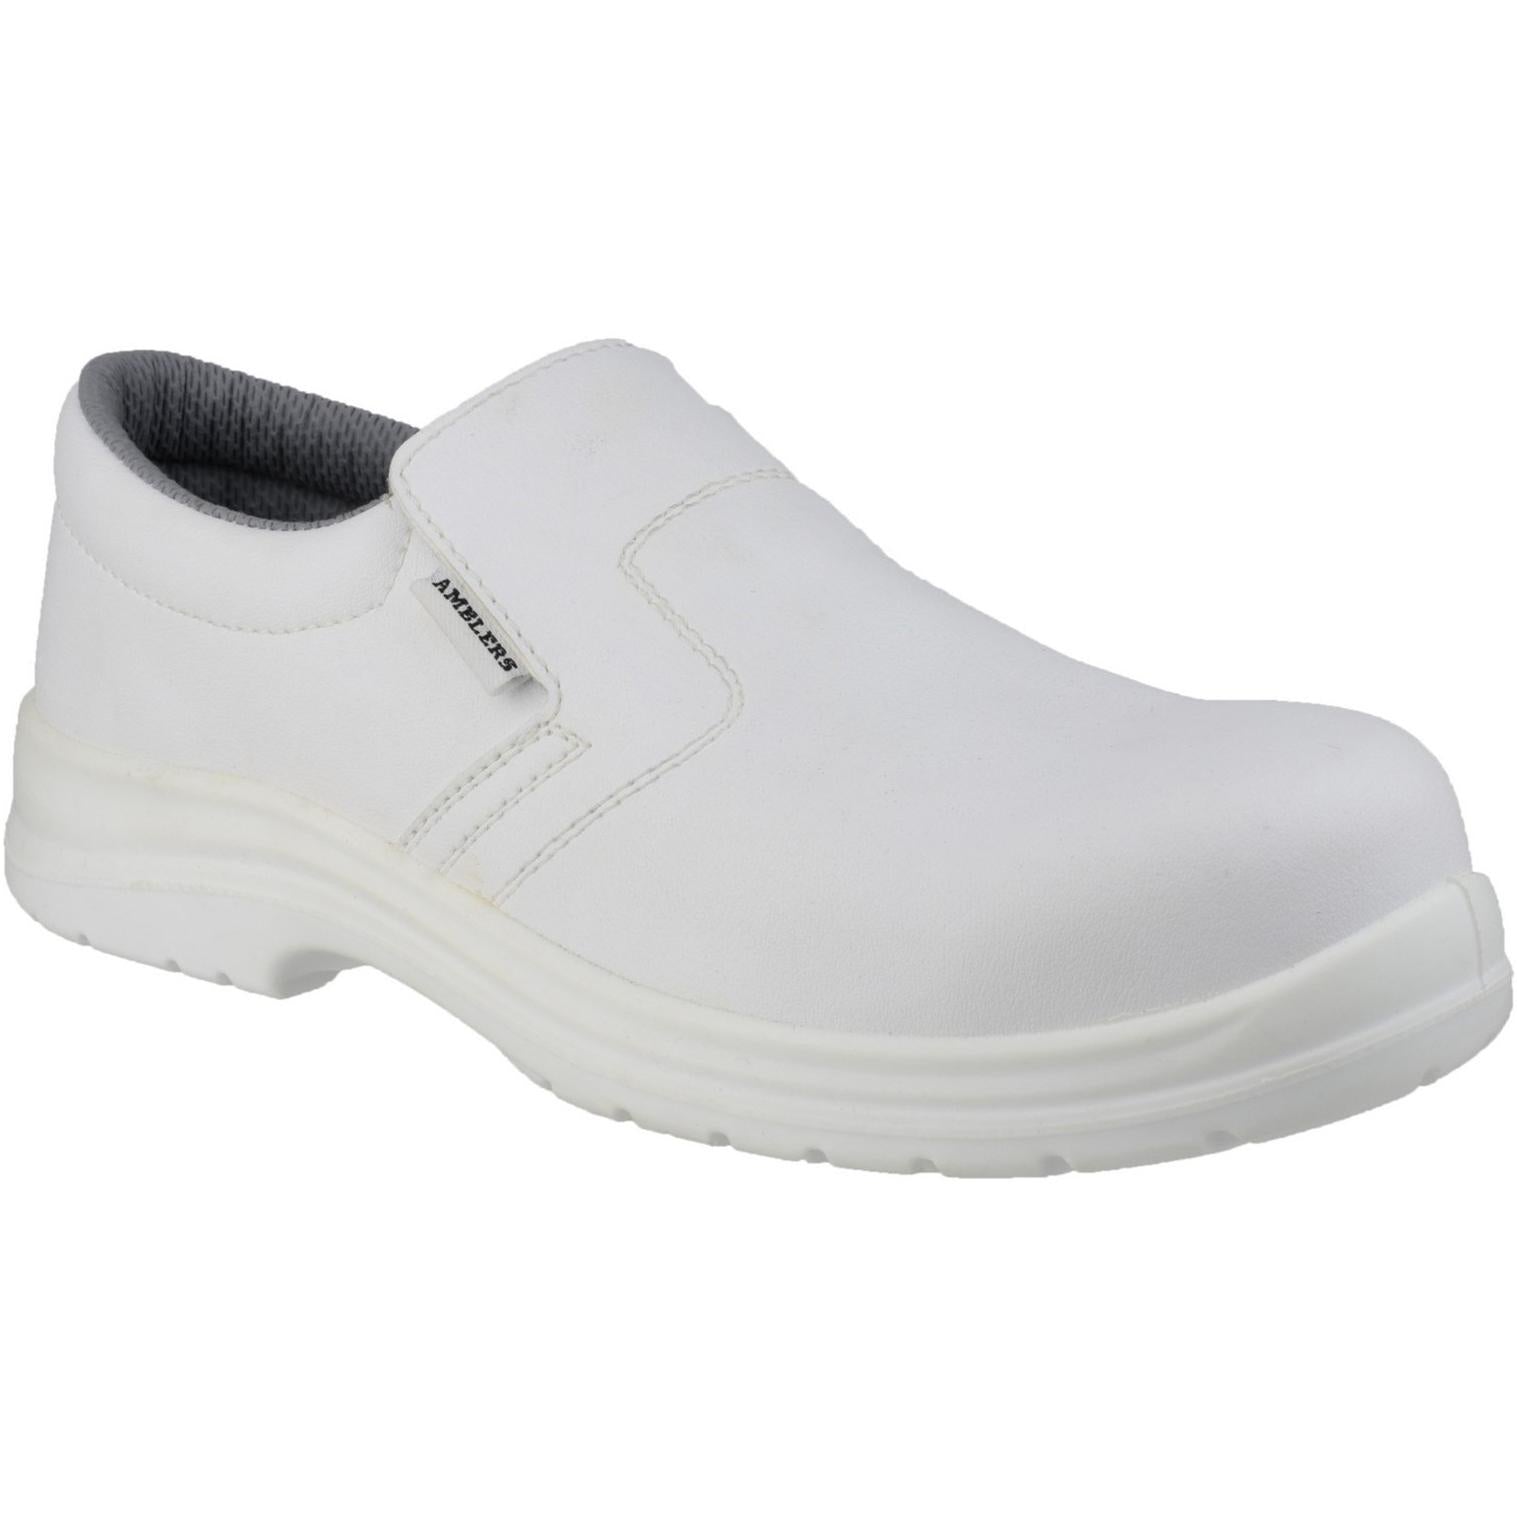 Amblers Safety FS510 Metal-Free Water-Resistant Slip on Safety Shoe